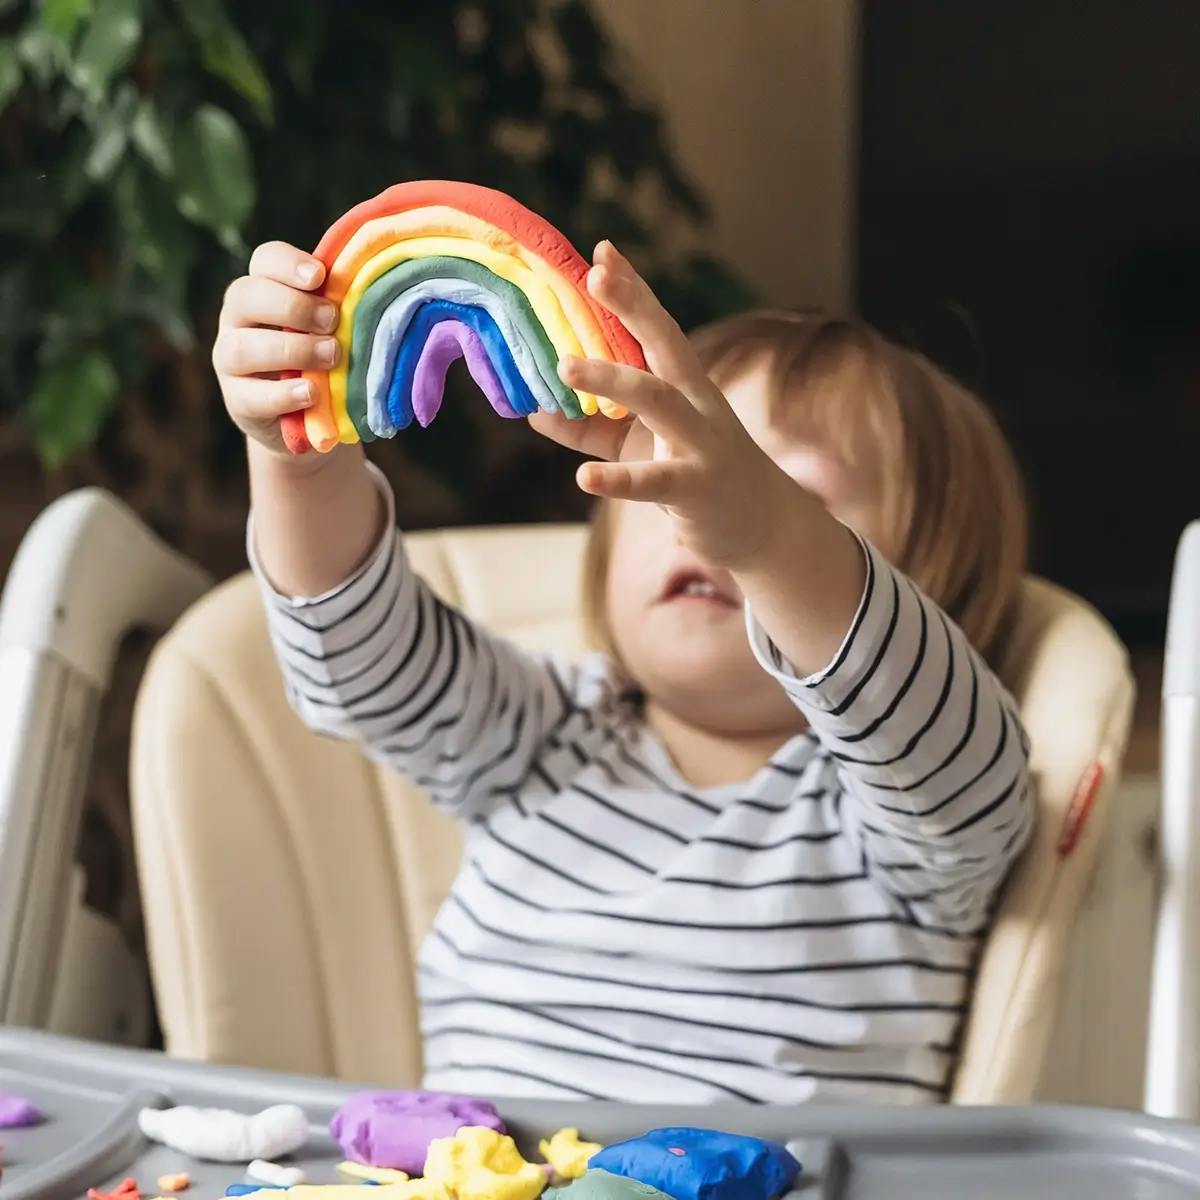 Young child holding a rainbow made from modeling clay for St Patrick’s Day crafts.